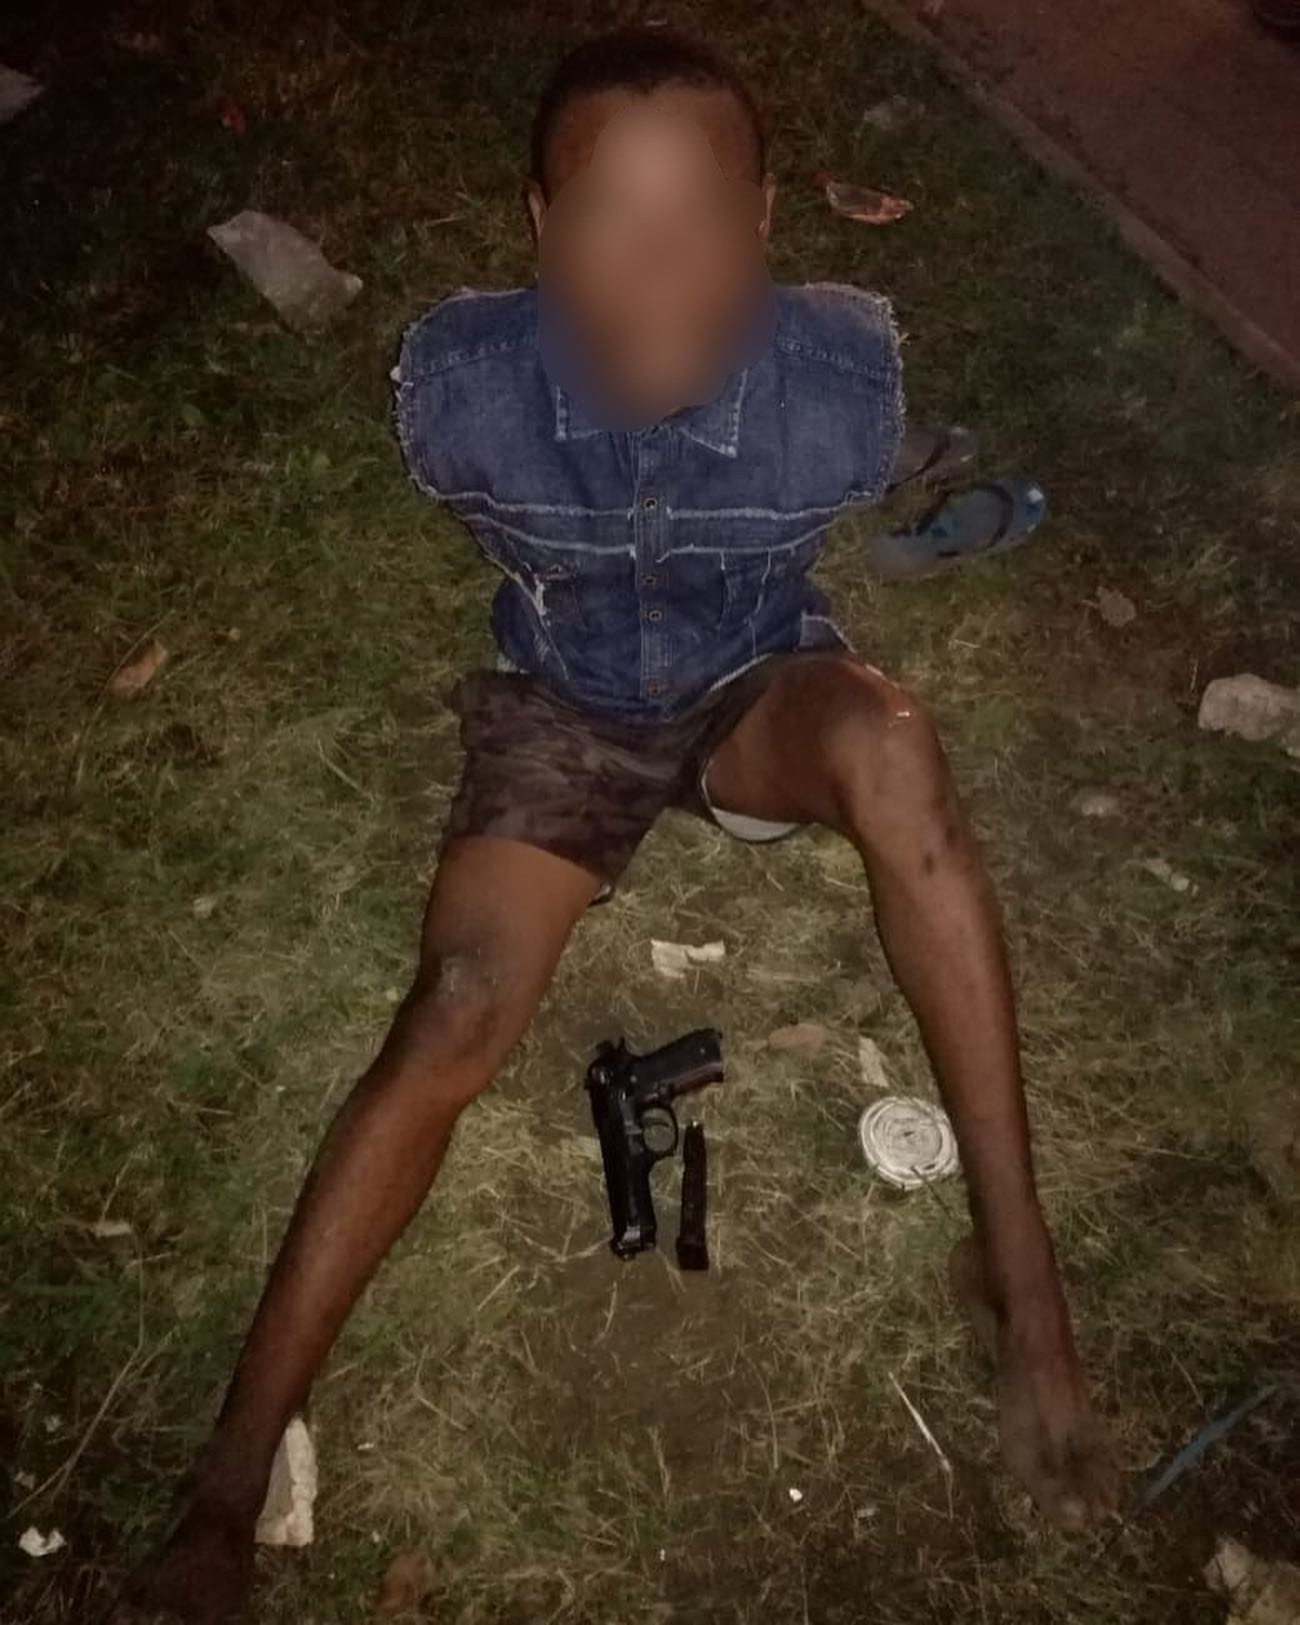 Robbery suspect arrested and firearm recovered in Canelands